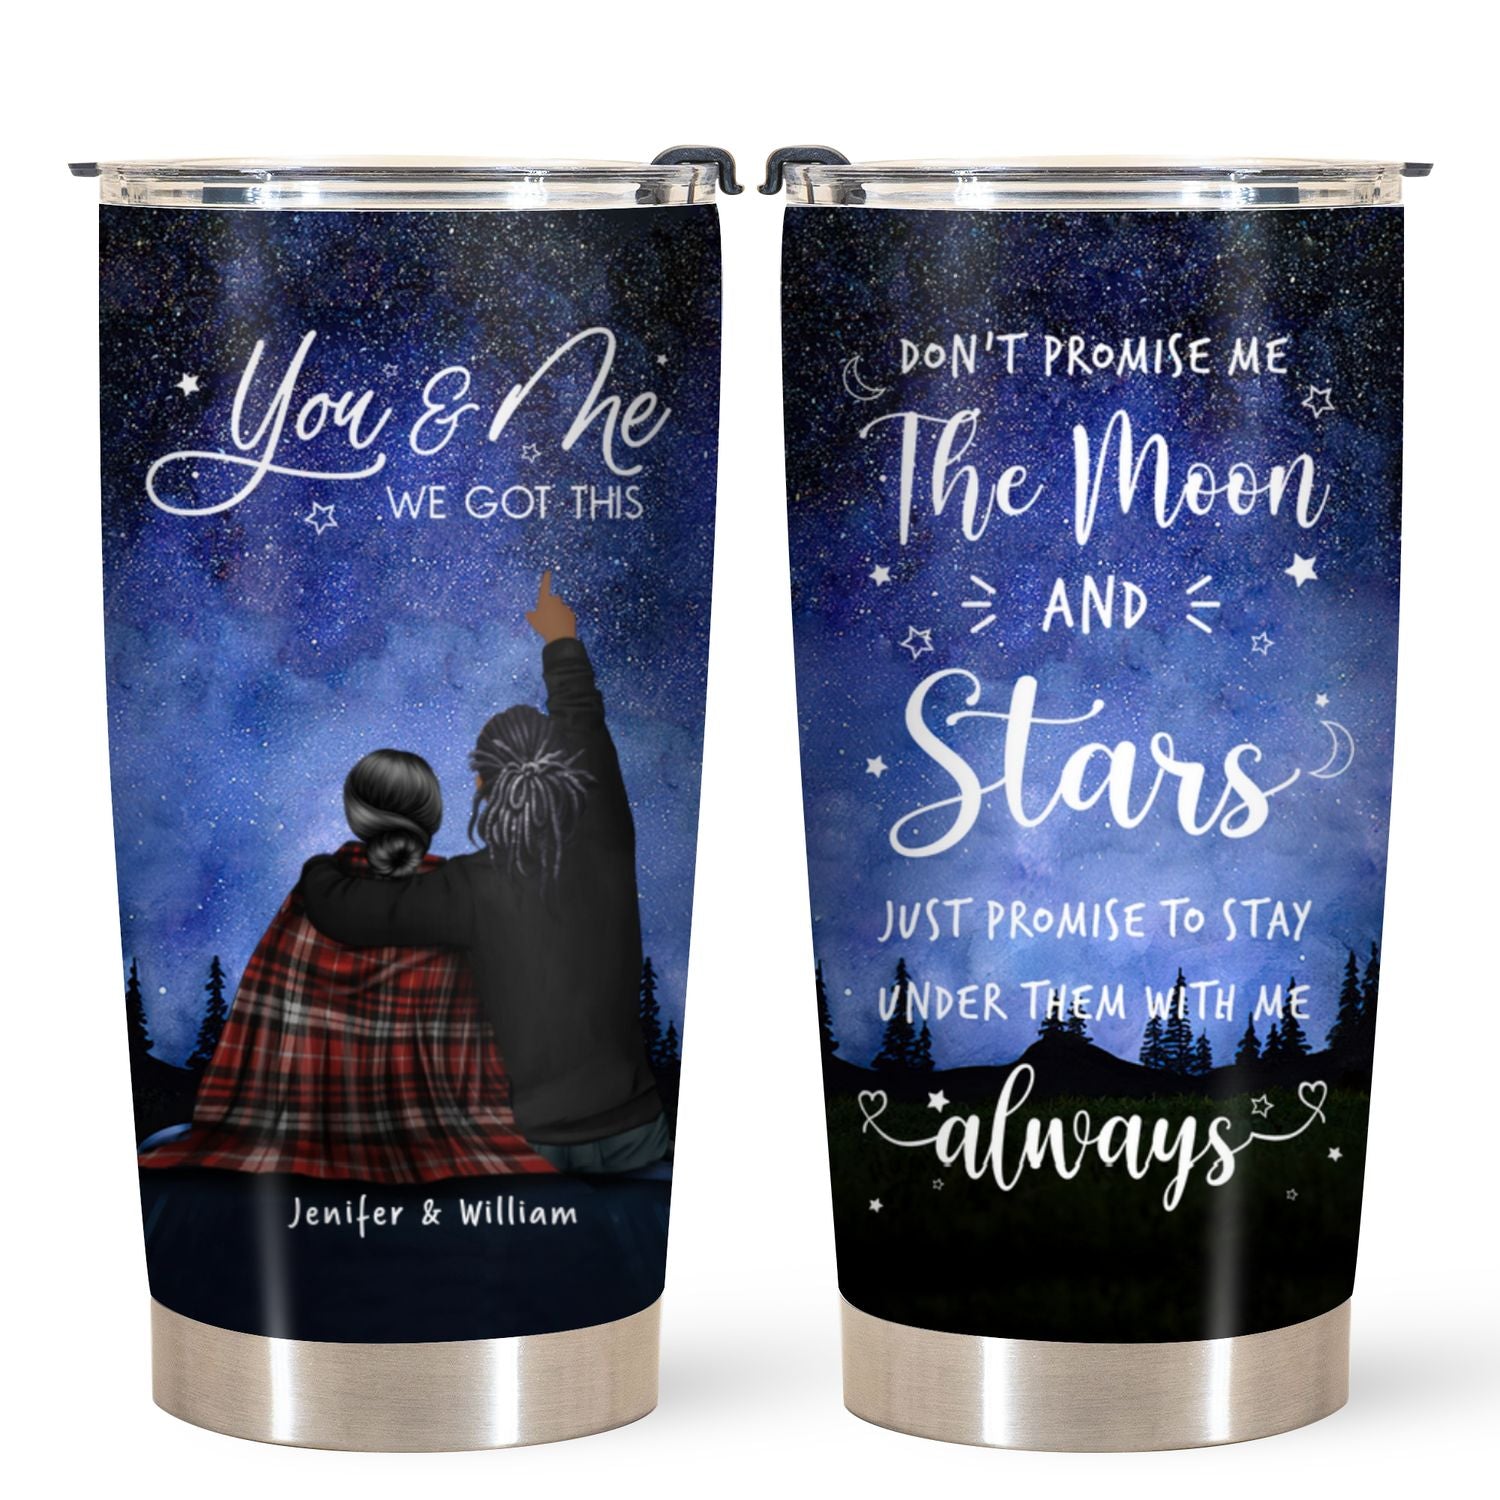 Personalized Tumbler - Gift For Couples - You & Me We Got This